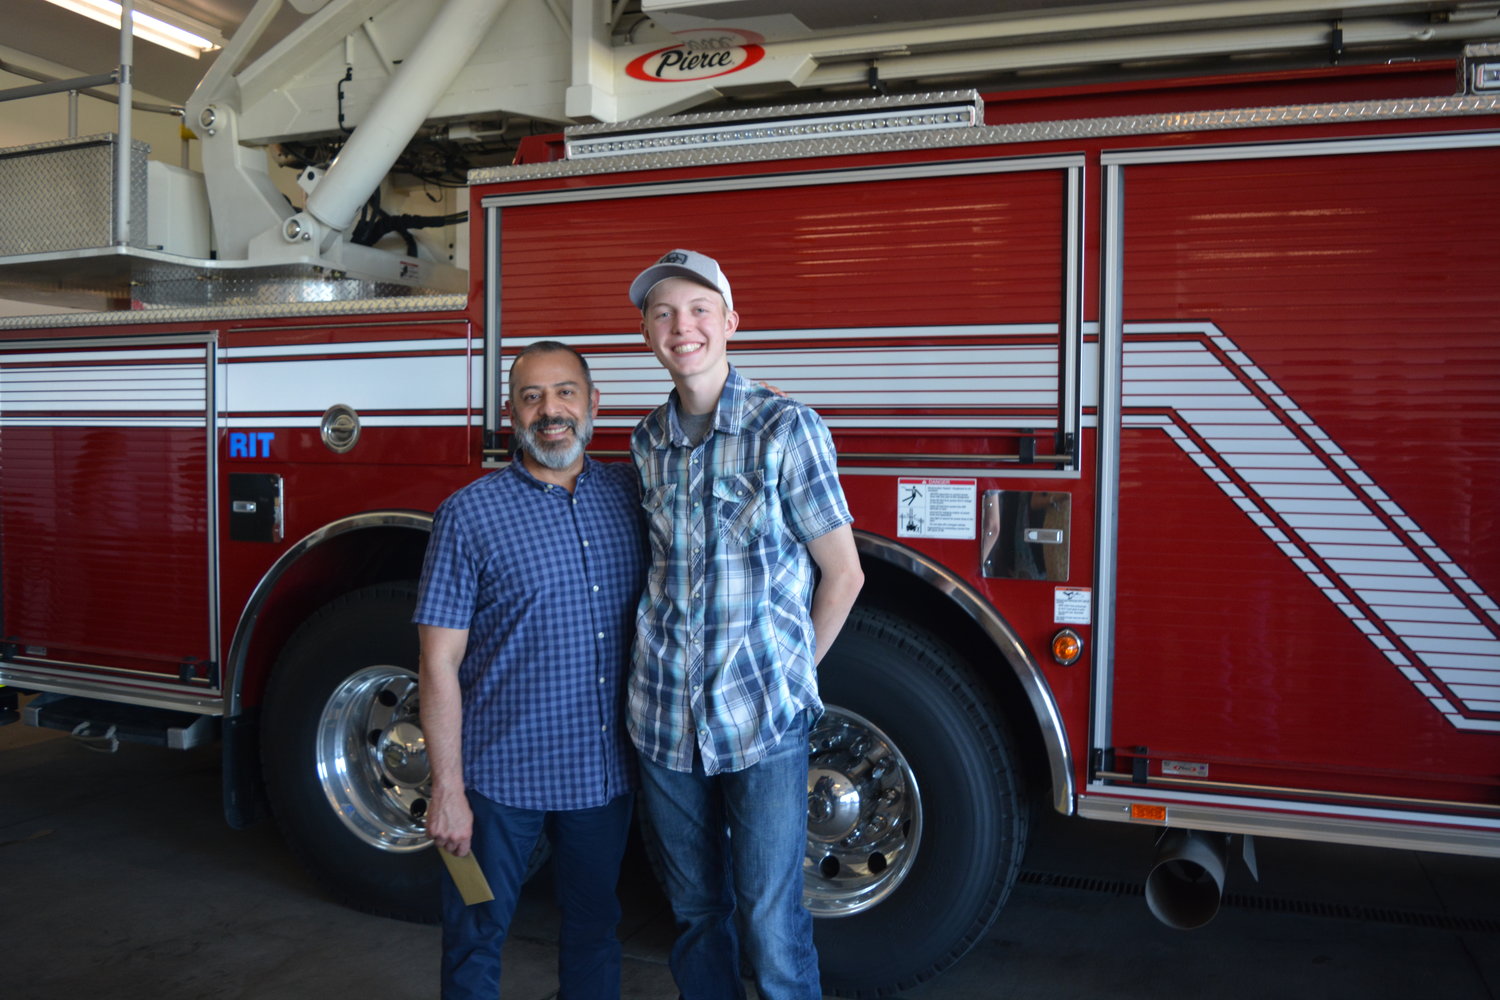 La Center High School Assistant Principal Daniel Ruiz and Tristan Martell were honored during an awards ceremony at Clark-Cowlitz Fire Station 21 in Ridgefield on June 23.